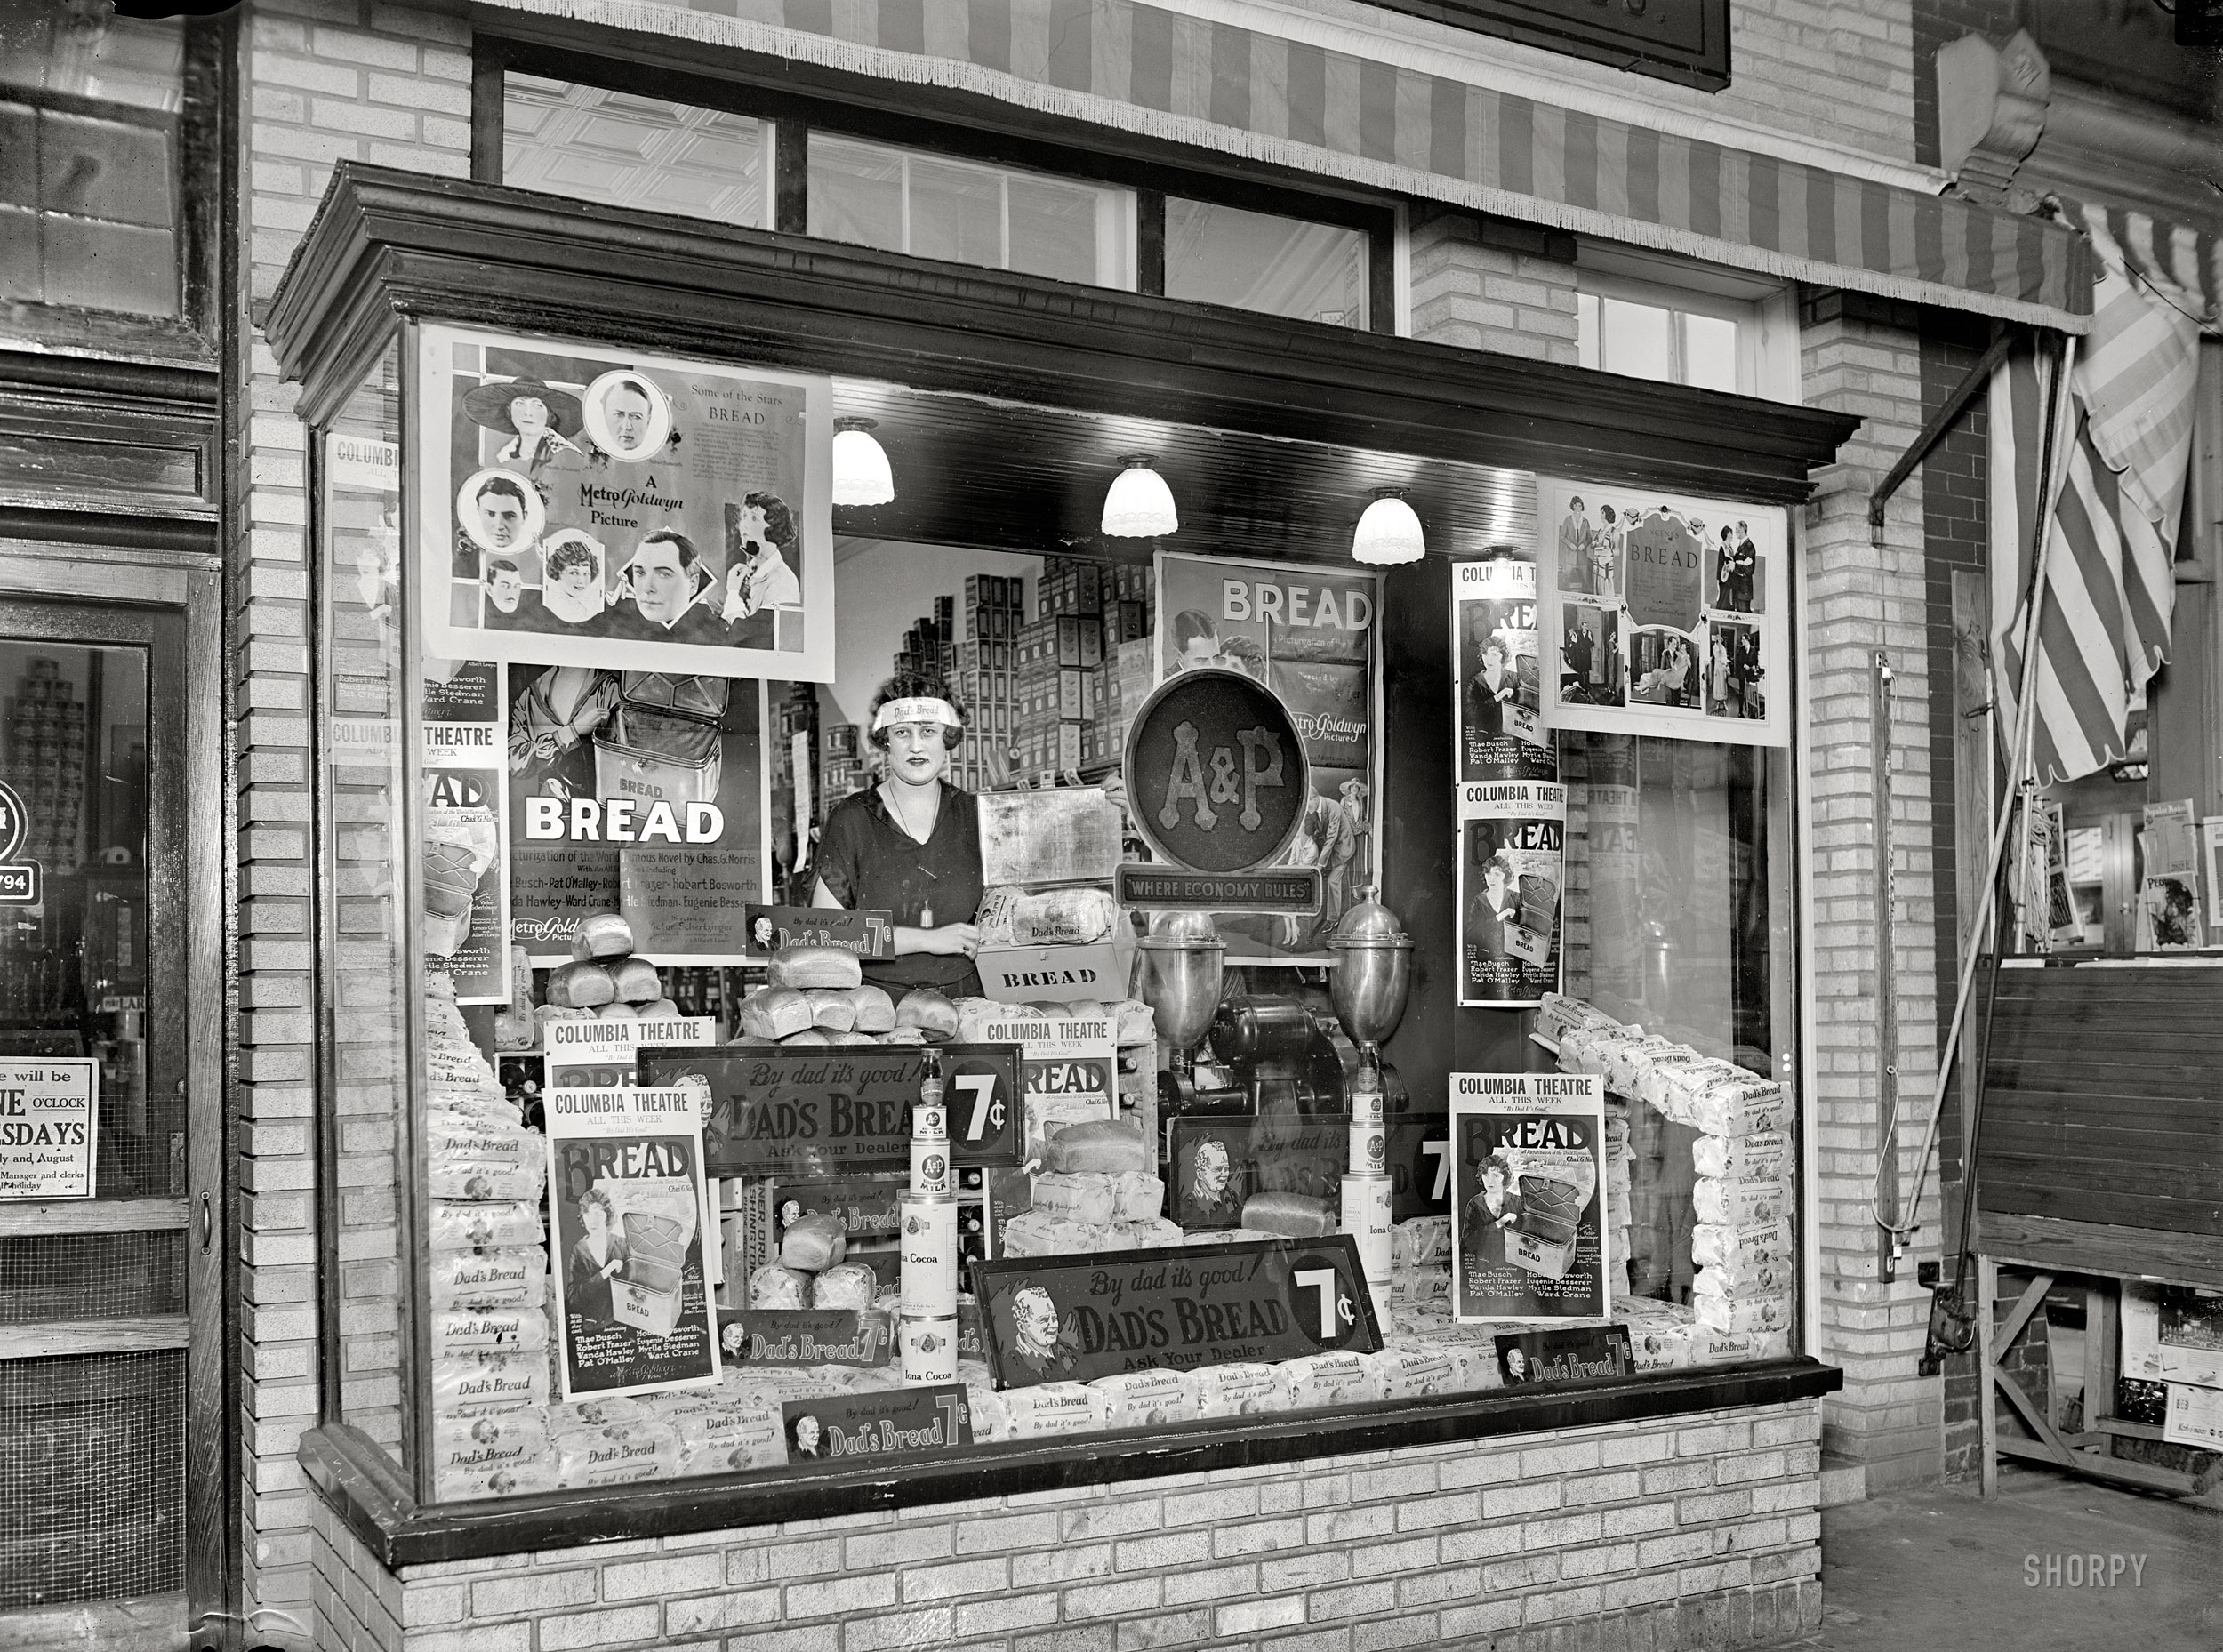 Washington, D.C., 1924. "A&P Stores, Miss Frances Talley."  Storefront spokesman for Dad's Bread and its rather literal marketing tie-in with a movie called "Bread." National Photo Company Collection glass negative. View full size.